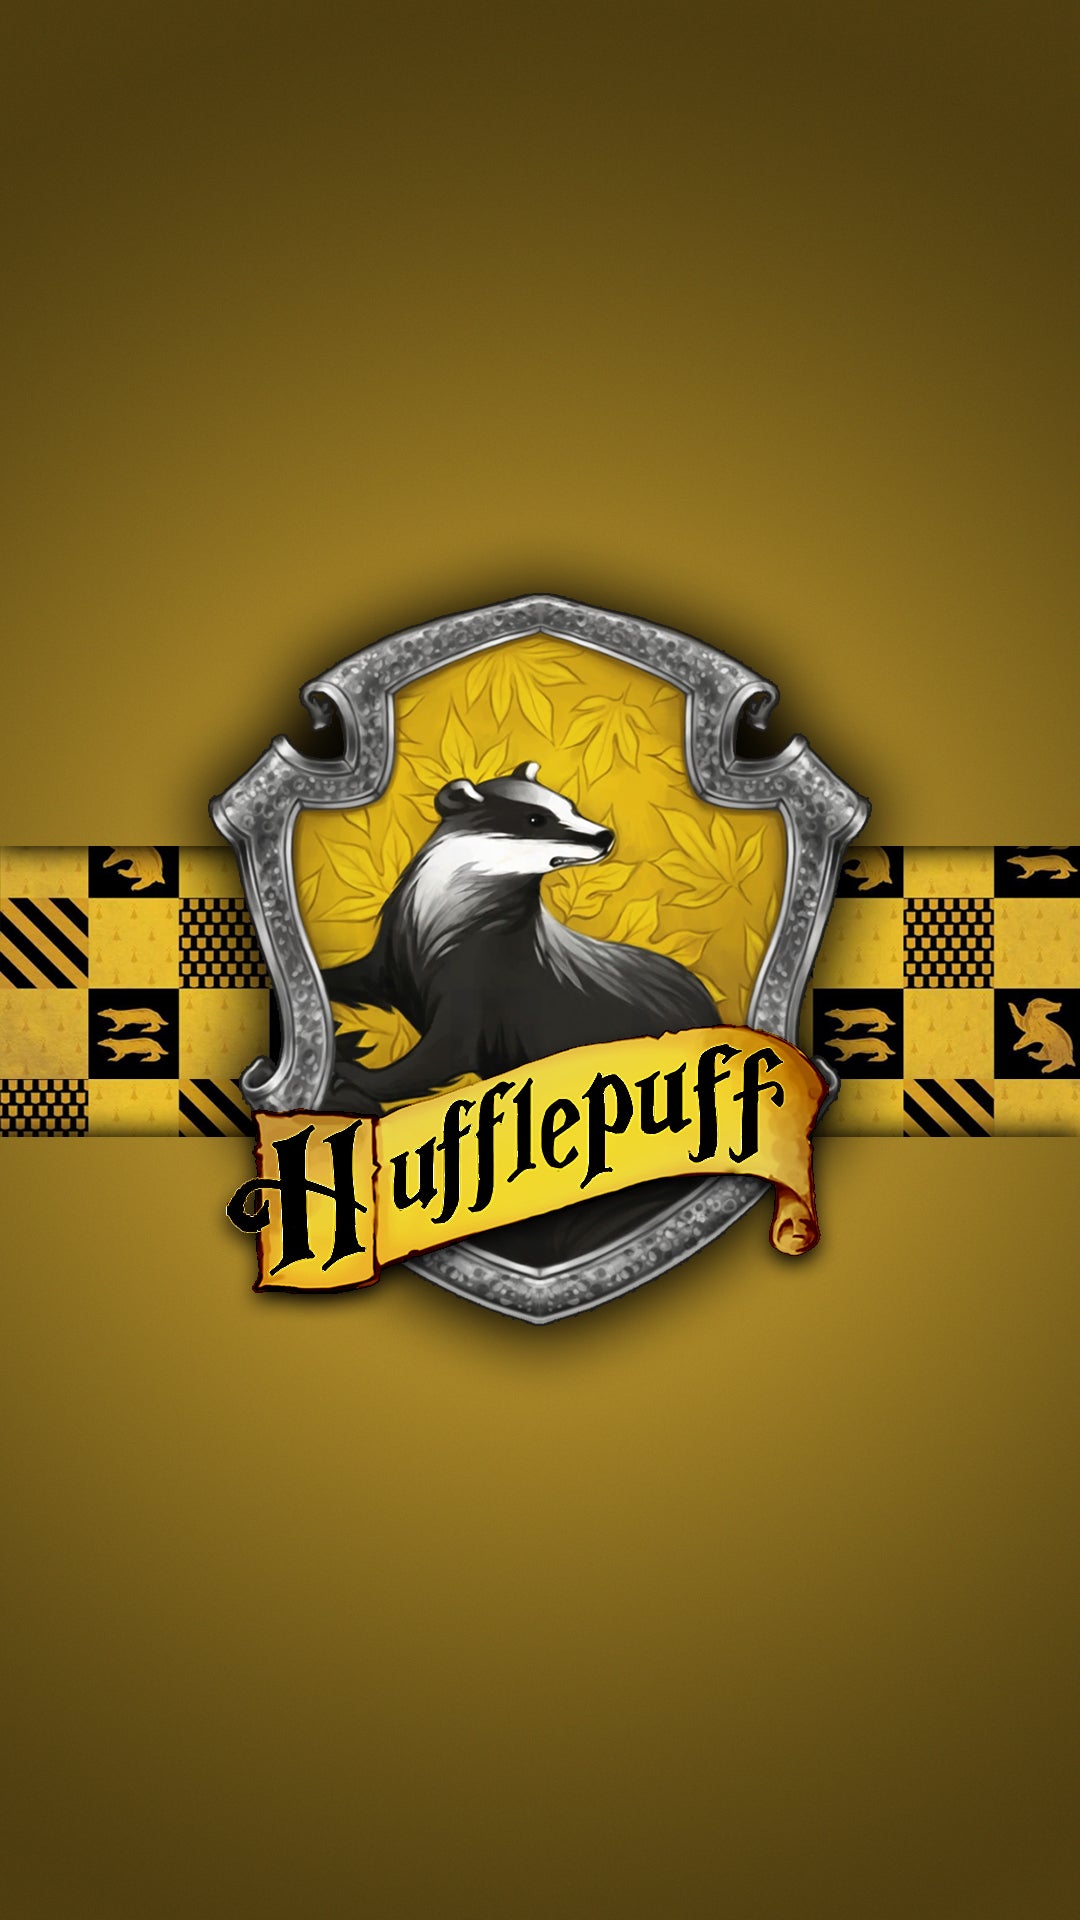 Hufflepuff Wallpaper I created for my wife! (messed up, fixed)